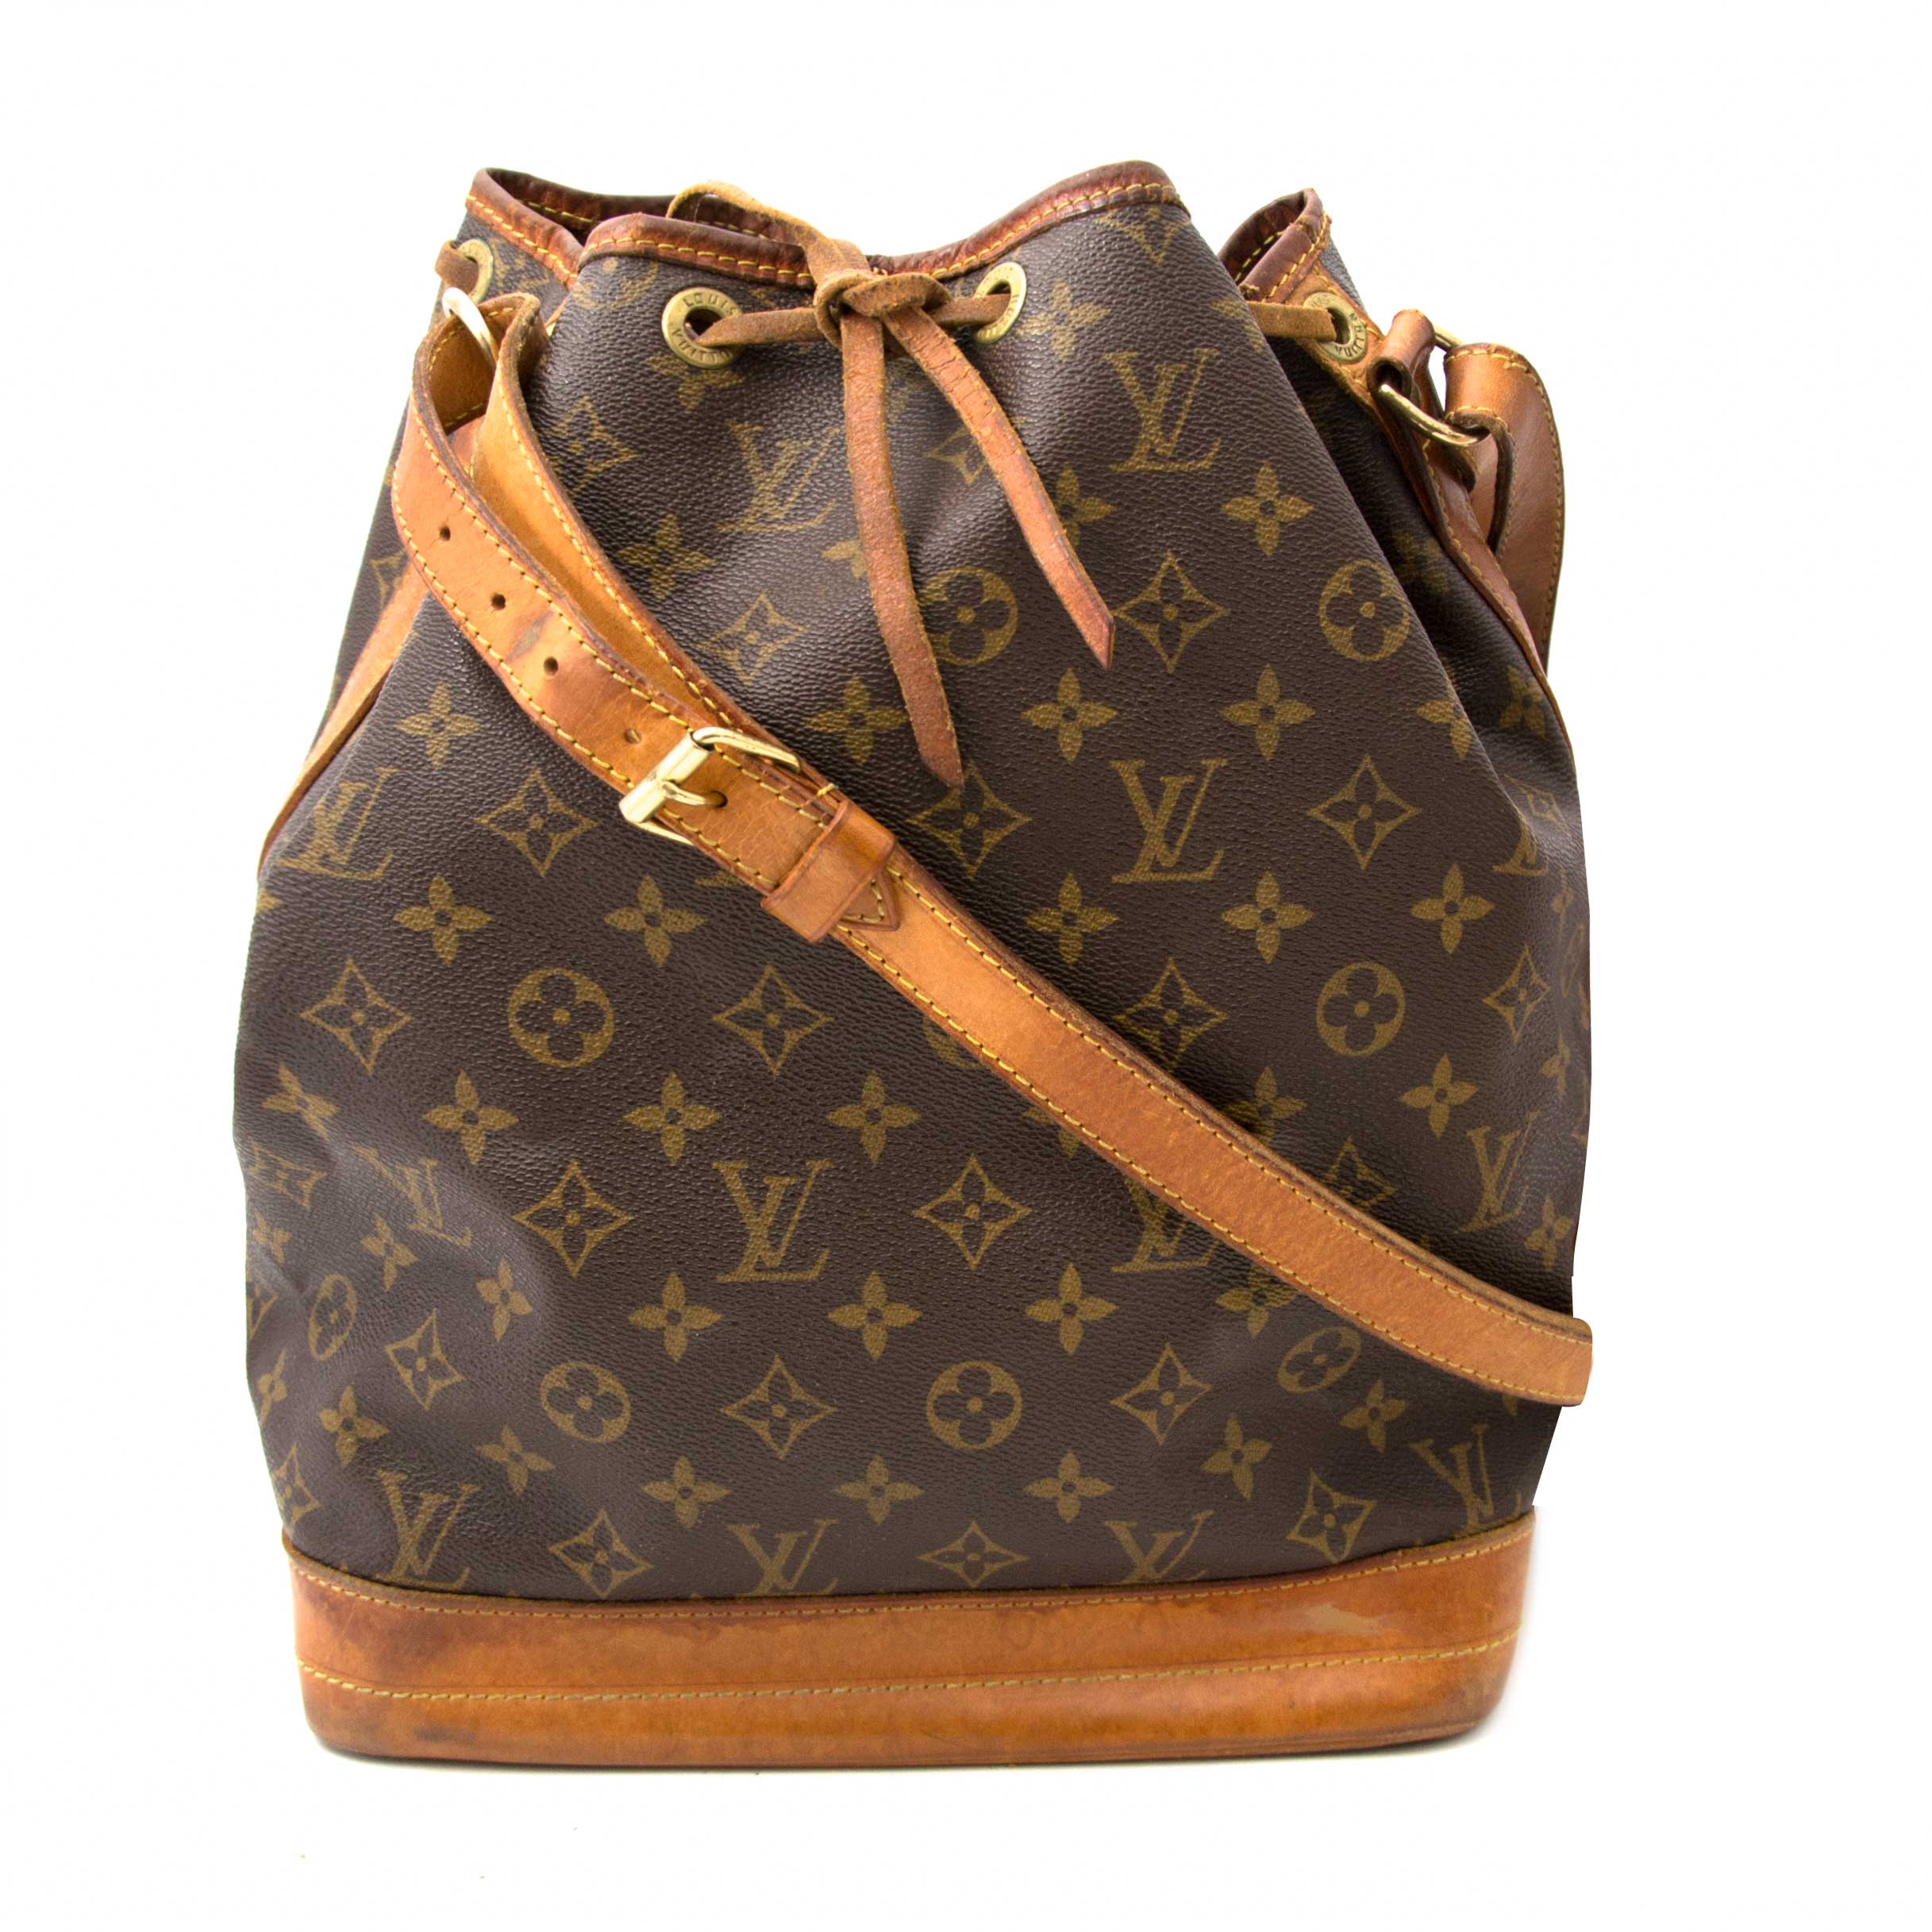 Louis Vuitton Monogram Nevefull Bag Limited Edition for Sale in Las Vegas,  NV - OfferUp